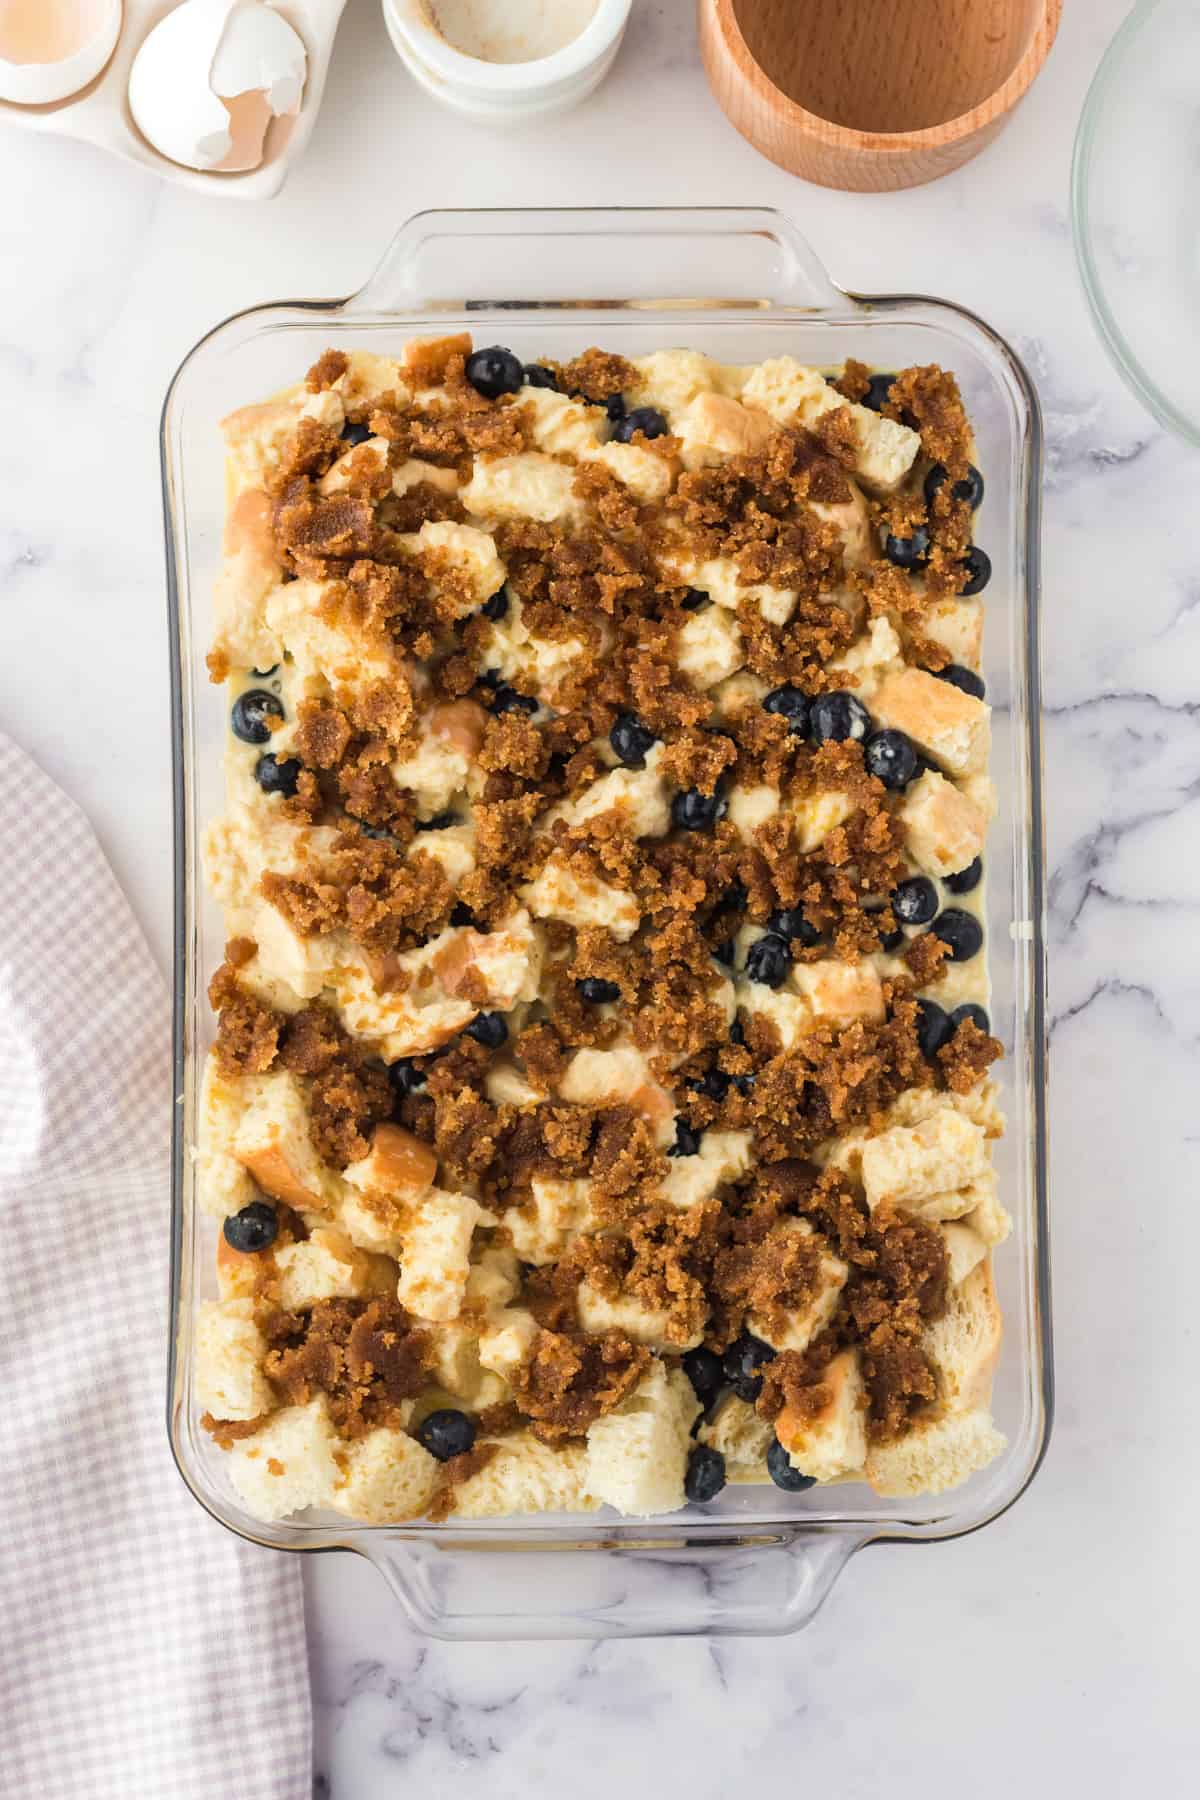 Unbaked french toast casserole with blueberries and cinnamon sugar topping.